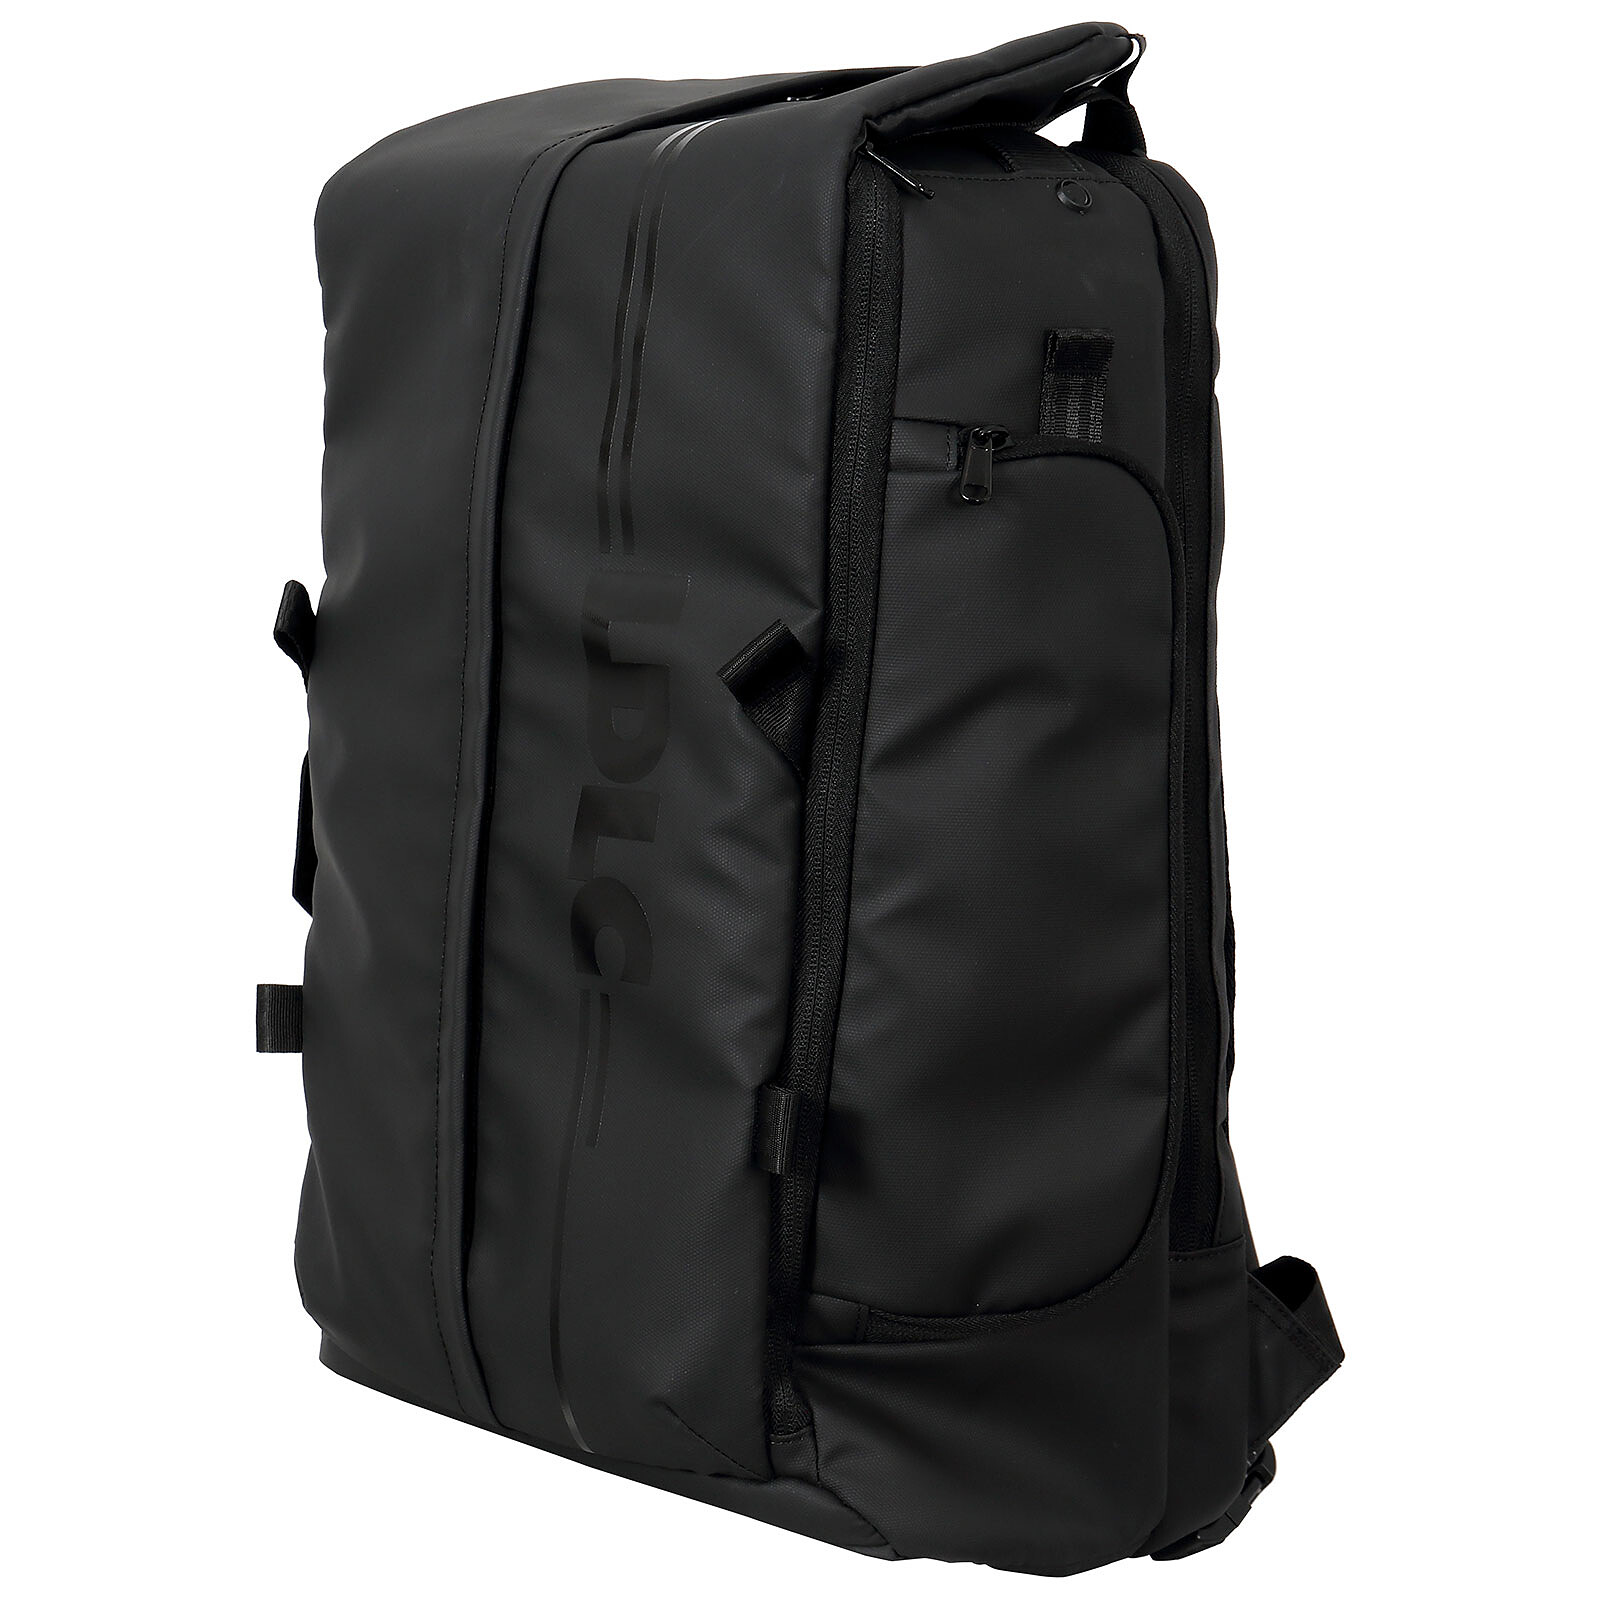 LDLC All in Pack - Bag, backpack, case - LDLC 3-year warranty | Holy Moley